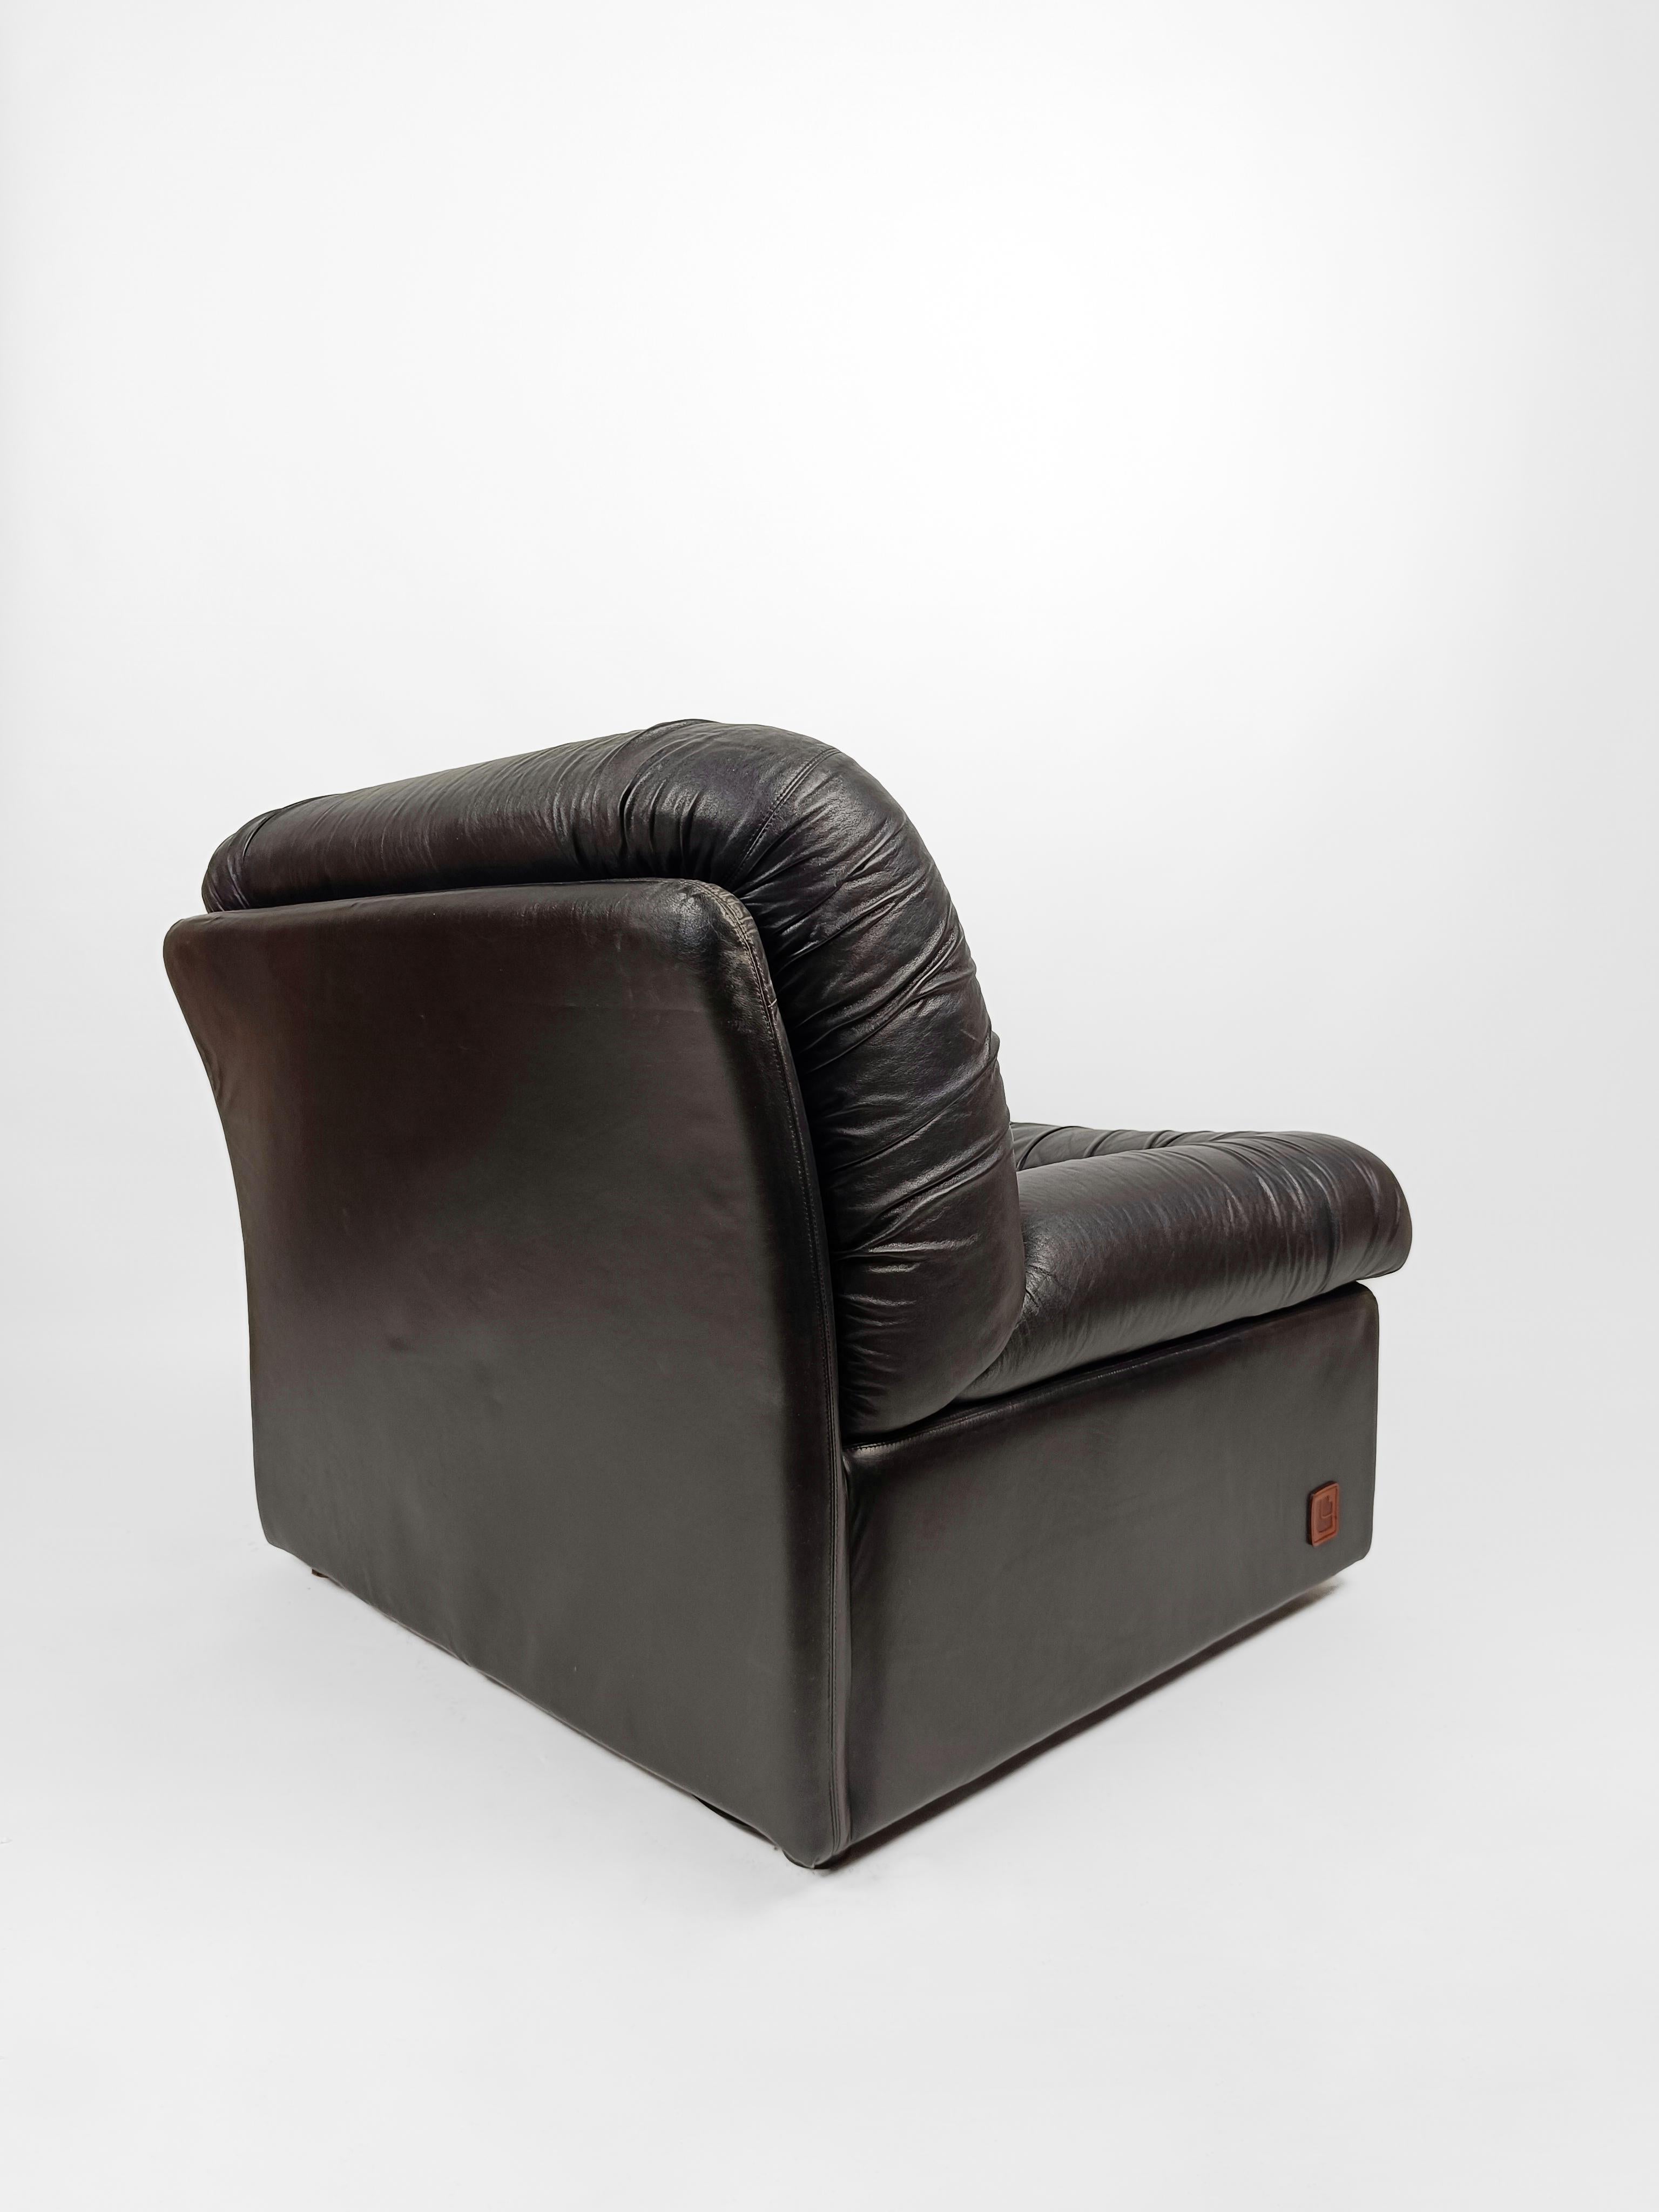 Italian Modular Lounge Chair in Black Leather model PANAREA by Lev & Lev, 1970s  For Sale 2